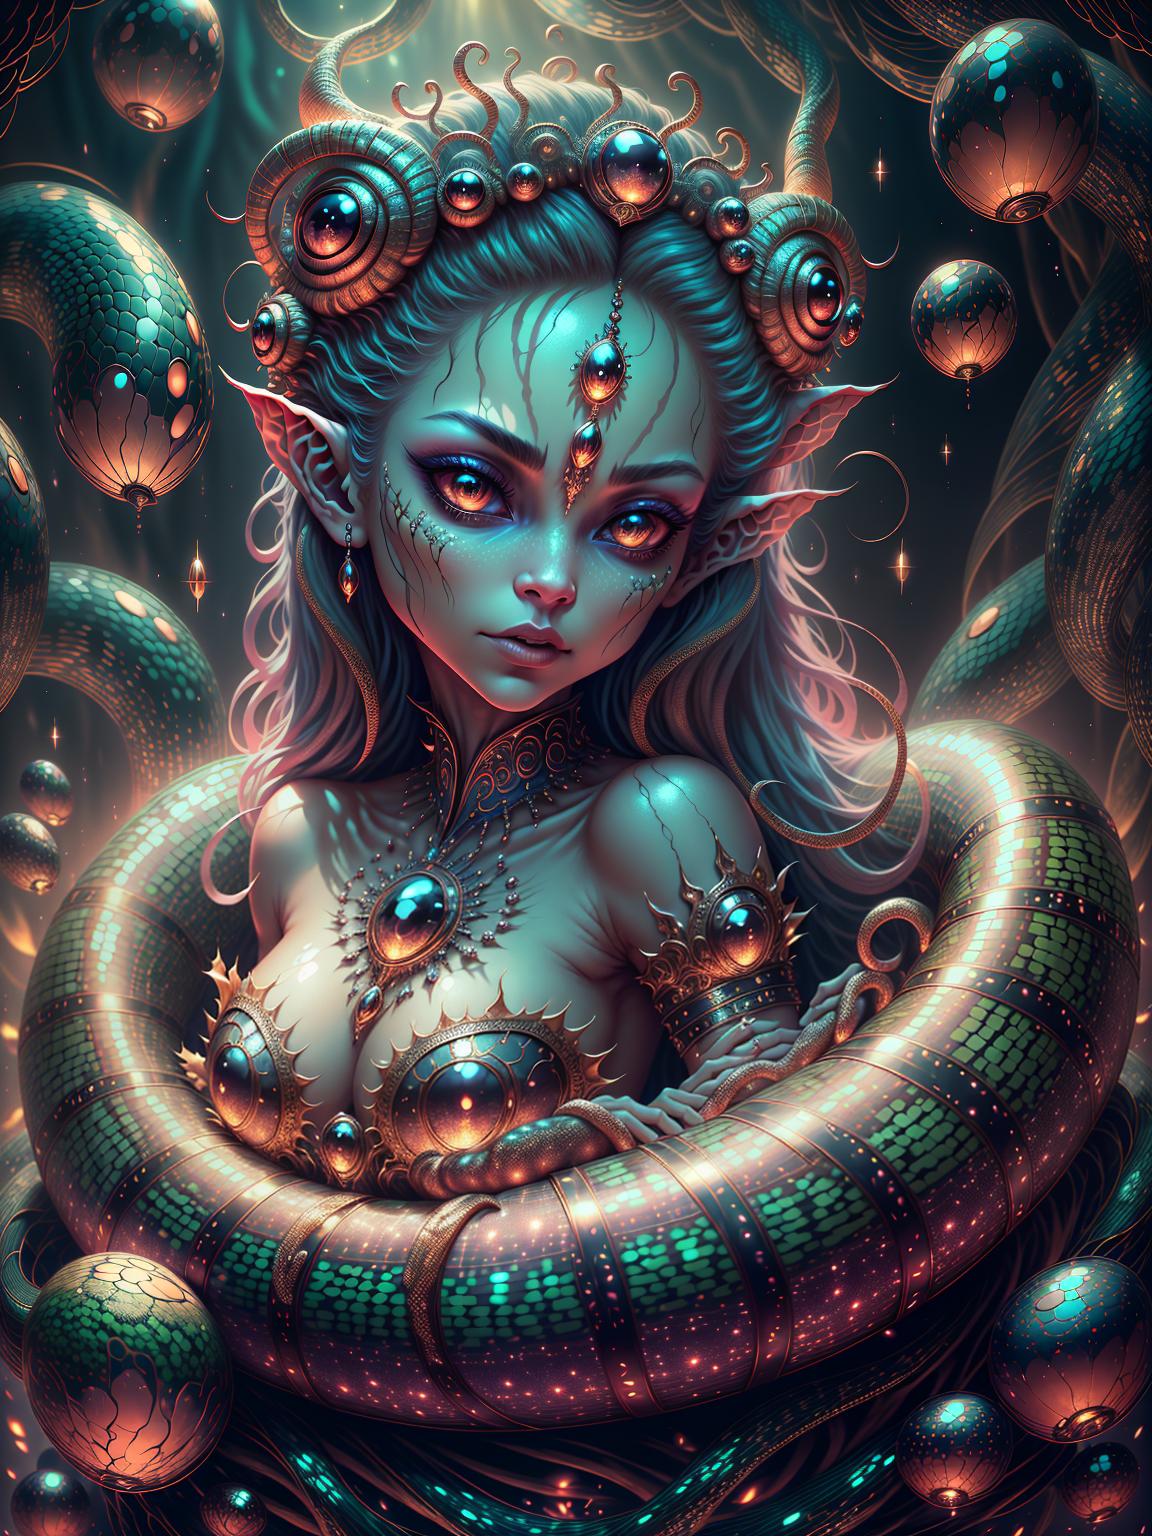  master piece, best quality, ultra detailed, highres, 4k.8k, Seductive and Powerful Medusa Queen, Seductively gazing at the viewer, Intense and captivating, BREAK Medusa Queen's Seductive Power, Enchanted garden, Twisting snake hair, adorned with jewels, BREAK Mystical and alluring, Soft glowing light, casting intriguing shadows, creature00d,Cu73Cre4ture